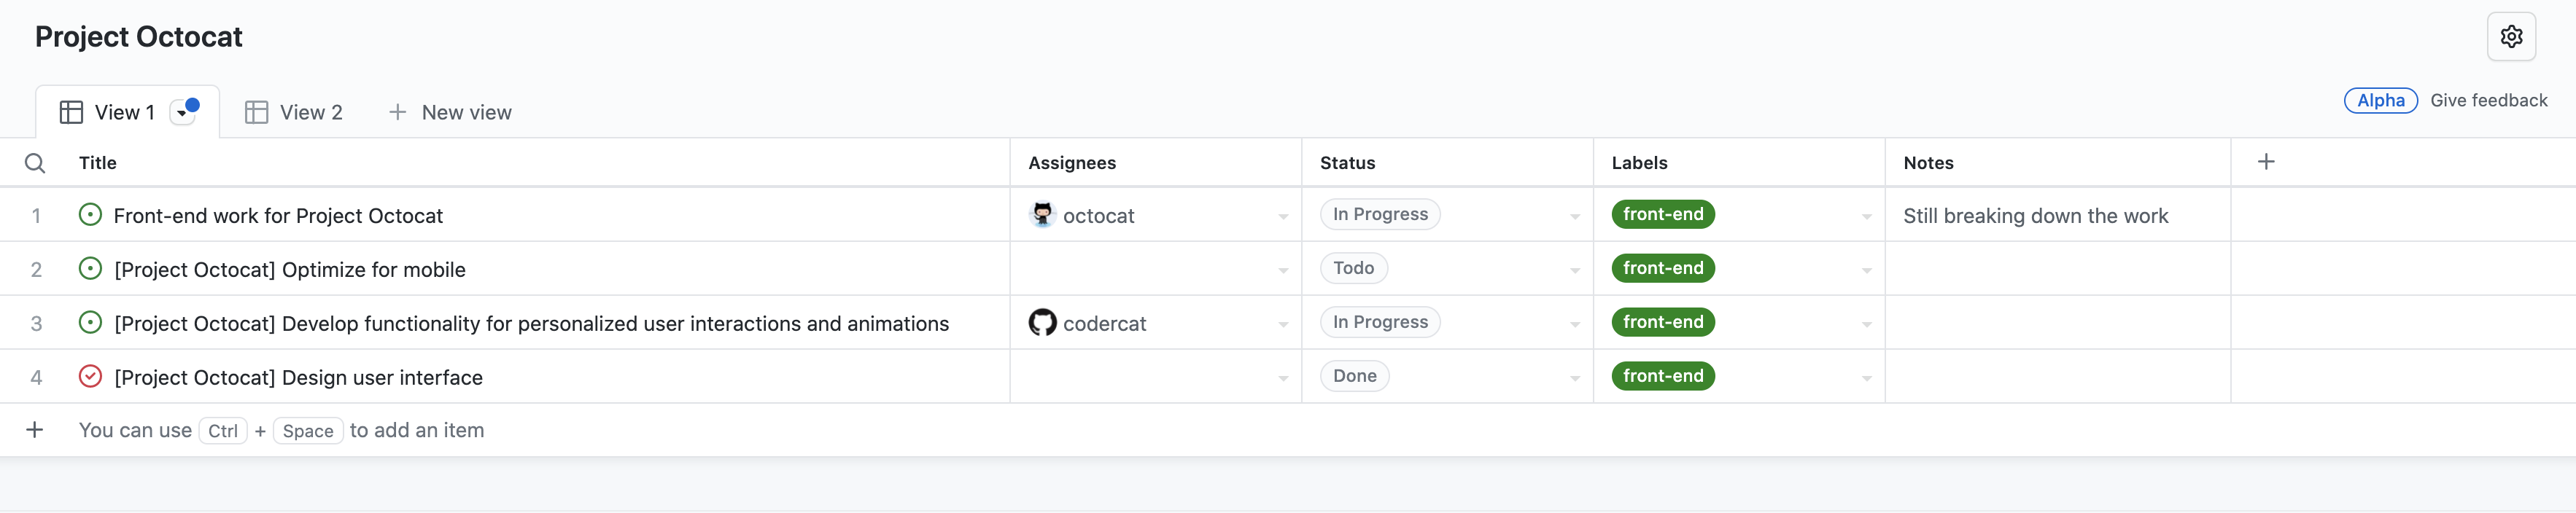 Screenshot of the table view of the "Project Octocat" project, containing a list of issues, with columns for "Title," "Assignees," "Status," "Labels," and "Notes."